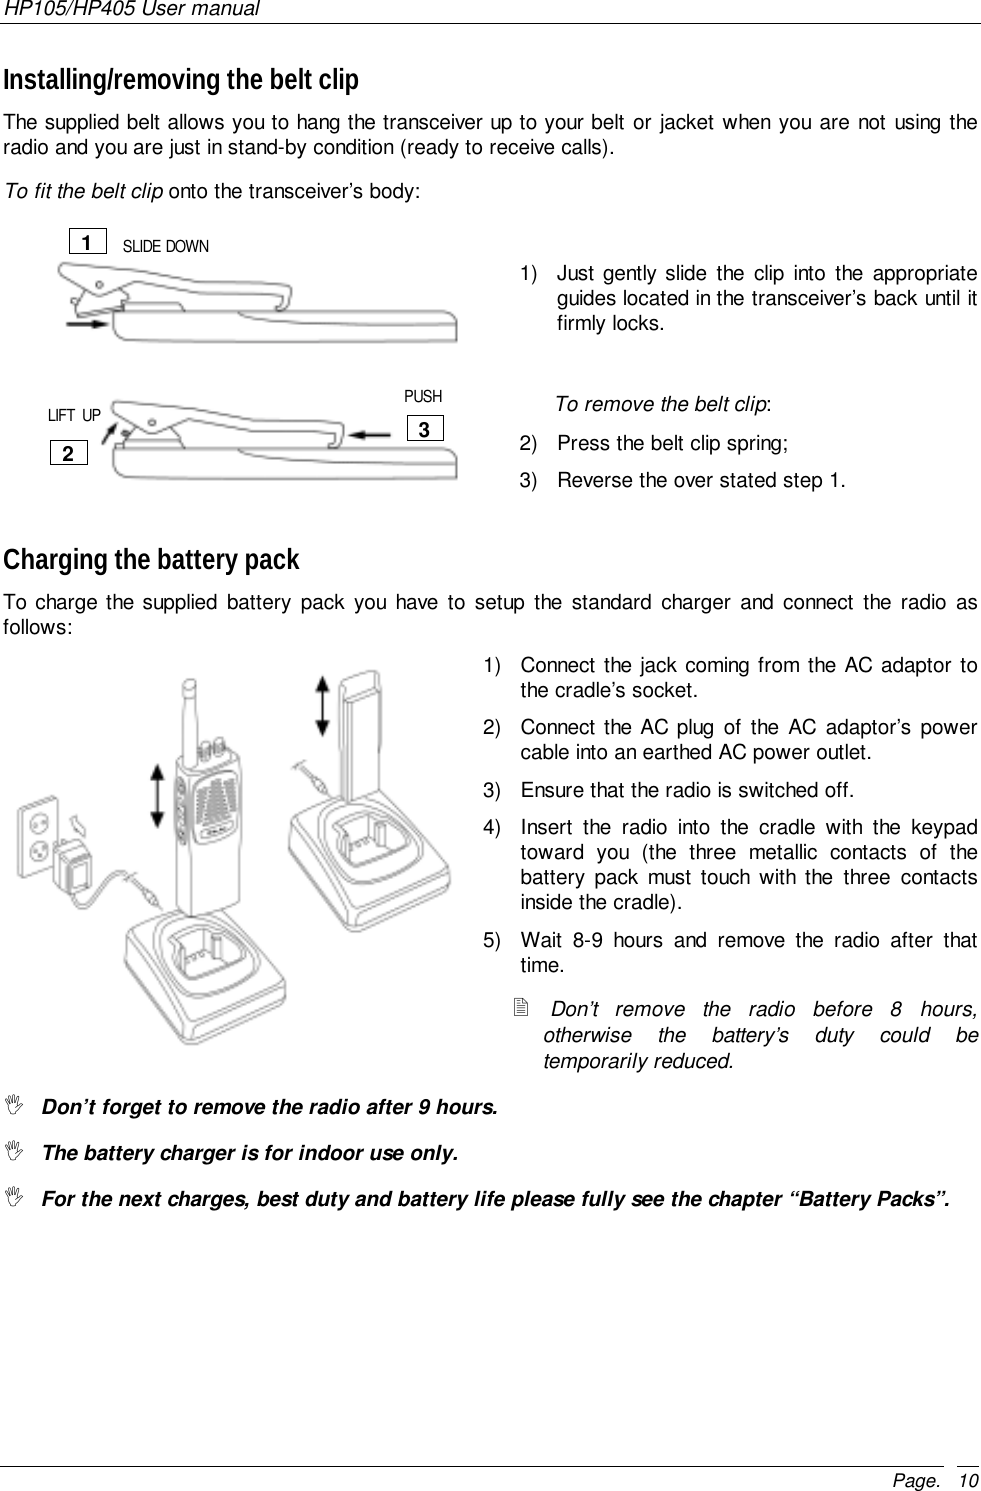 HP105/HP405 User manualPage. 10Installing/removing the belt clipThe supplied belt allows you to hang the transceiver up to your belt or jacket when you are not using theradio and you are just in stand-by condition (ready to receive calls).To fit the belt clip onto the transceiver’s body:1)  Just gently slide the clip into the appropriateguides located in the transceiver’s back until itfirmly locks.                                                                                        To remove the belt clip:2)  Press the belt clip spring;3)  Reverse the over stated step 1.Charging the battery packTo charge the supplied battery pack you have to setup the standard charger and connect the radio asfollows:1)  Connect the jack coming from the AC adaptor tothe cradle’s socket.2)  Connect the AC plug of the AC adaptor’s powercable into an earthed AC power outlet.3)  Ensure that the radio is switched off.4)  Insert the radio into the cradle with the keypadtoward you (the three metallic contacts of thebattery pack must touch with the three contactsinside the cradle).5)  Wait 8-9 hours and remove the radio after thattime.! Don’t remove the radio before 8 hours,otherwise the battery’s duty could betemporarily reduced.&quot; Don’t forget to remove the radio after 9 hours.&quot; The battery charger is for indoor use only.&quot; For the next charges, best duty and battery life please fully see the chapter “Battery Packs”.123SLIDE DOWNLIFT  UP PUSH